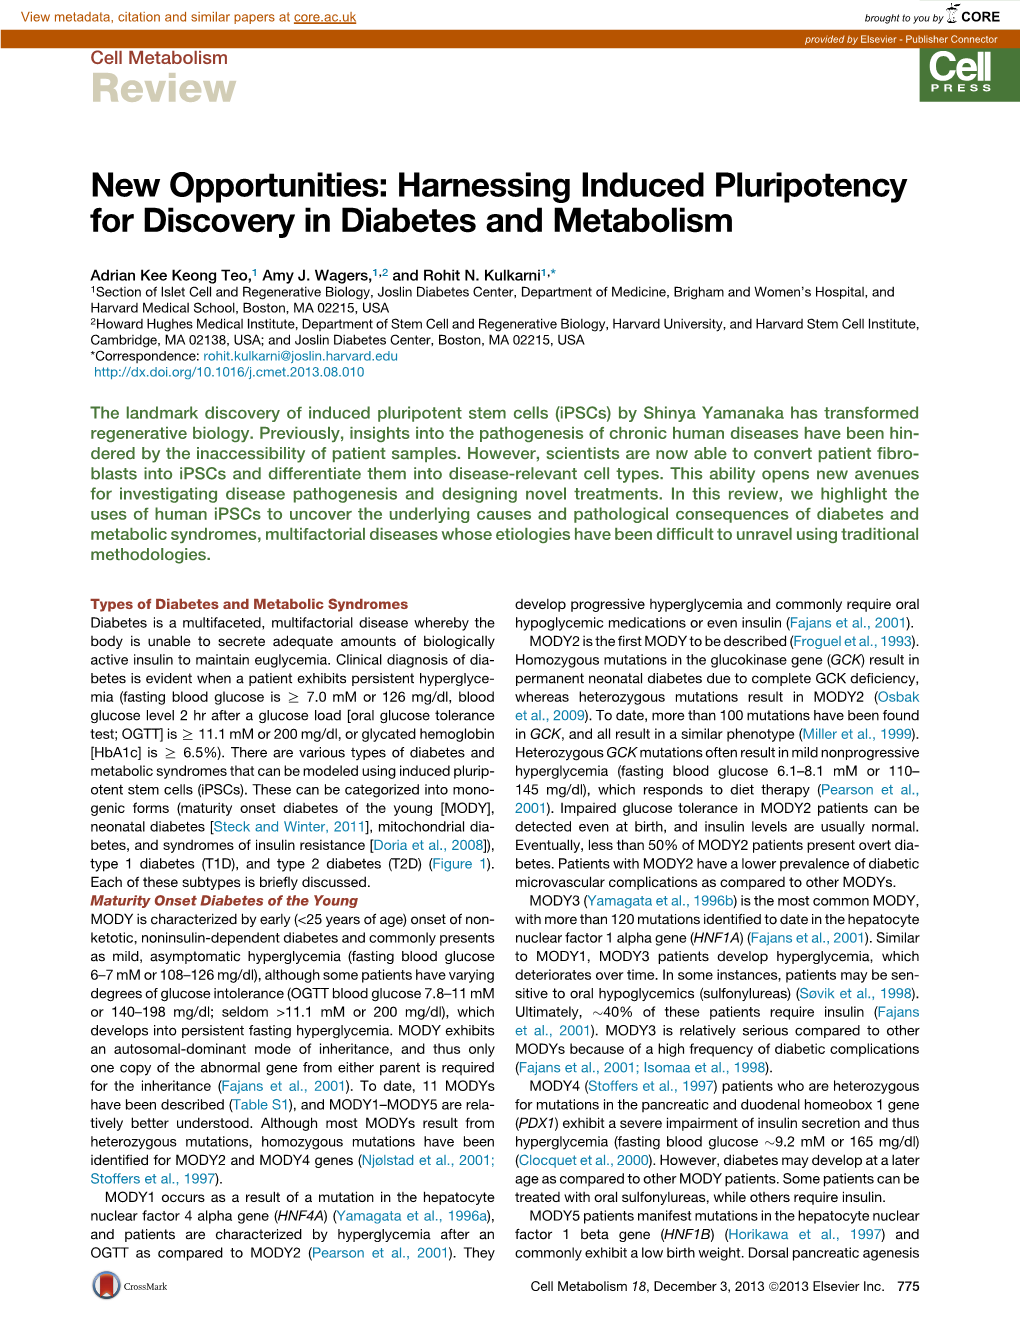 Harnessing Induced Pluripotency for Discovery in Diabetes and Metabolism